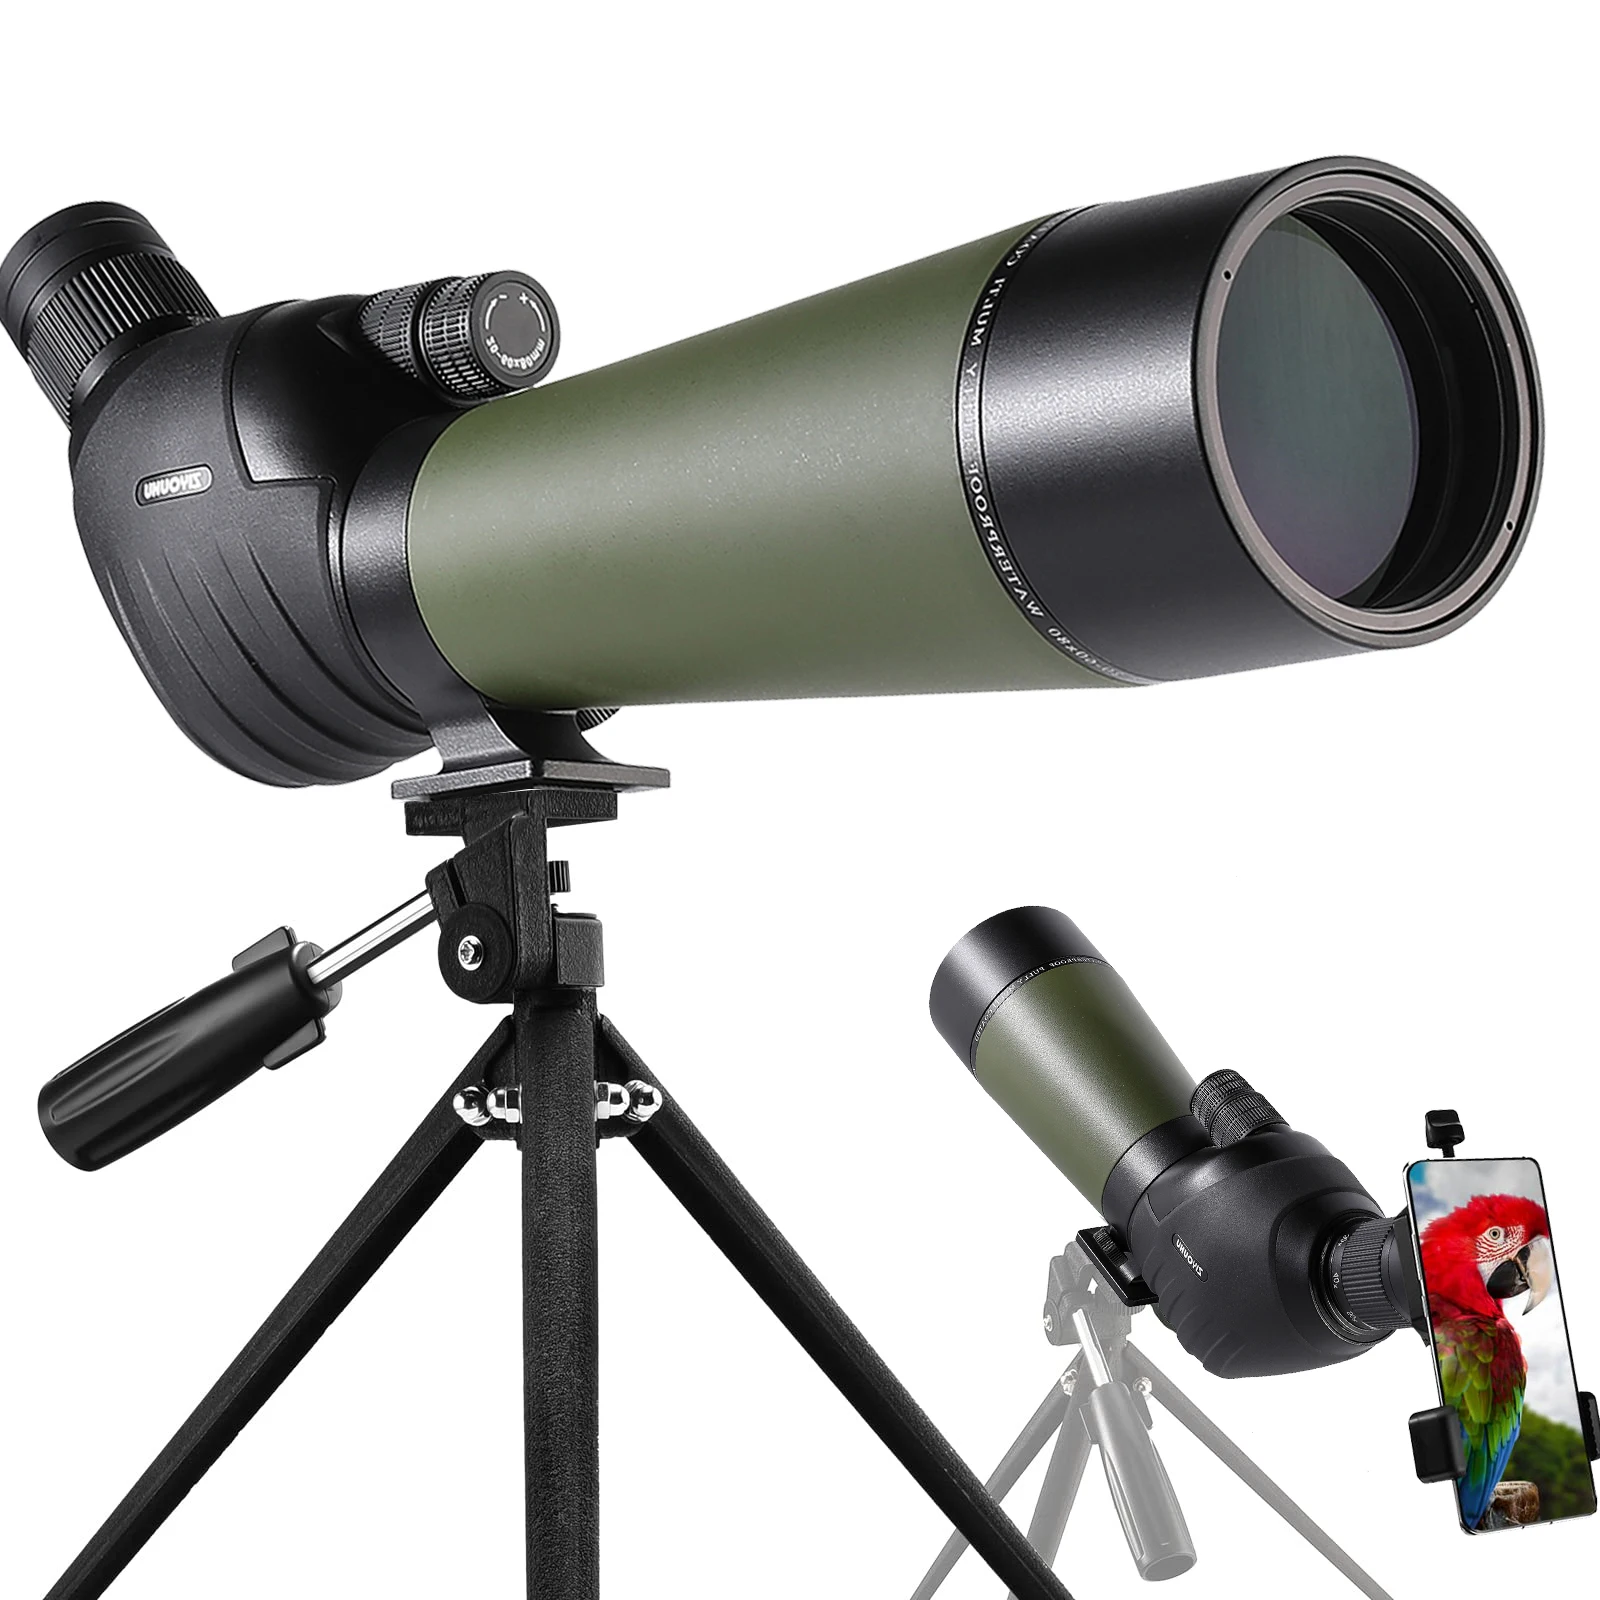 20-60X80 Monoculars Dual Focusing Telescope Spotter Scope with Tripod for Target Shooting Hunting Bird Watching Moon Observing